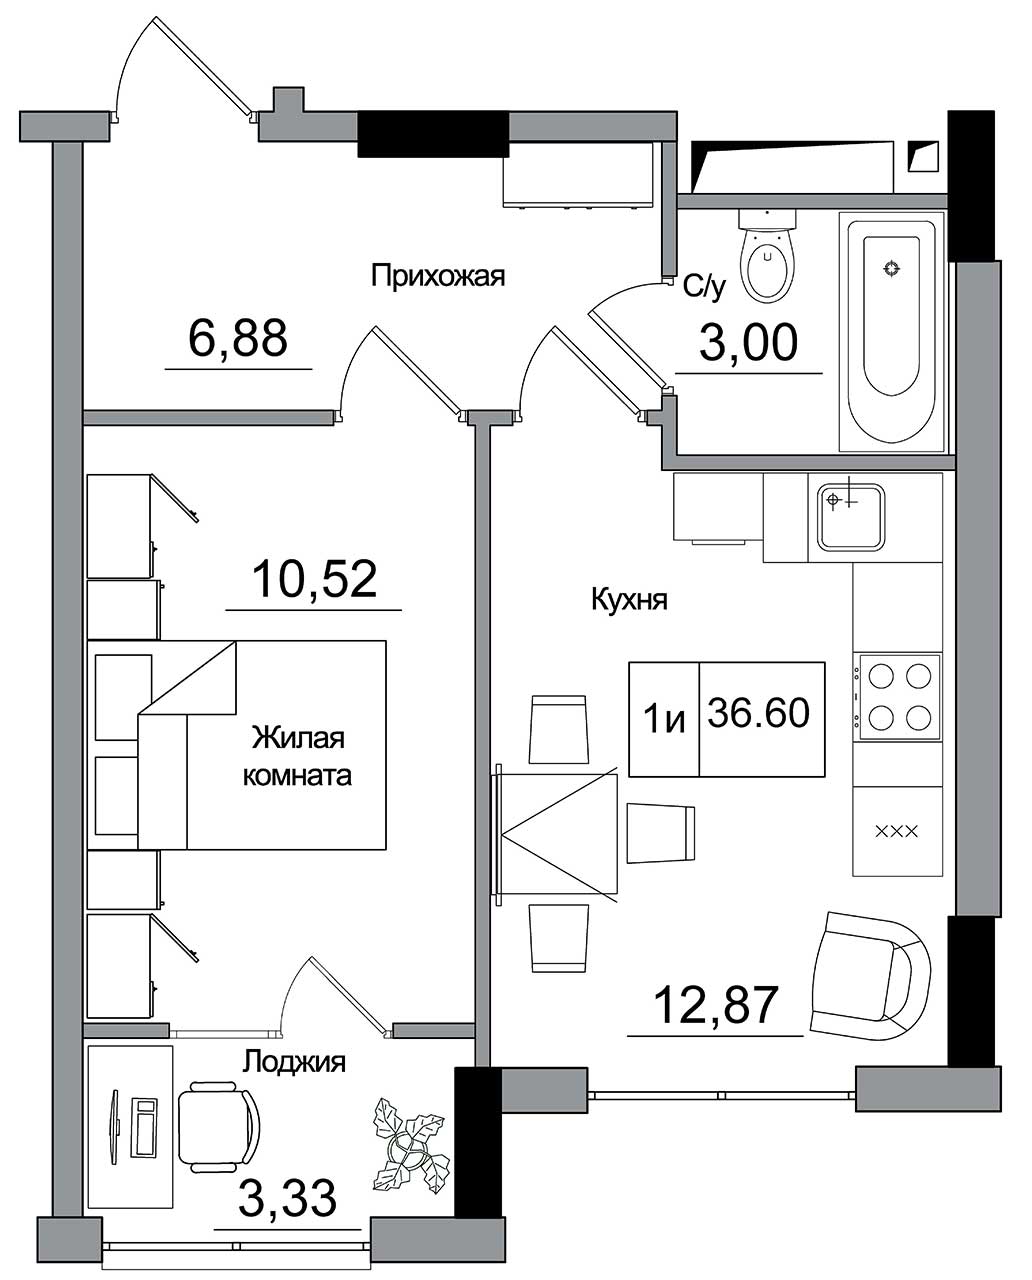 Planning 1-rm flats area 36.6m2, AB-16-04/00012.